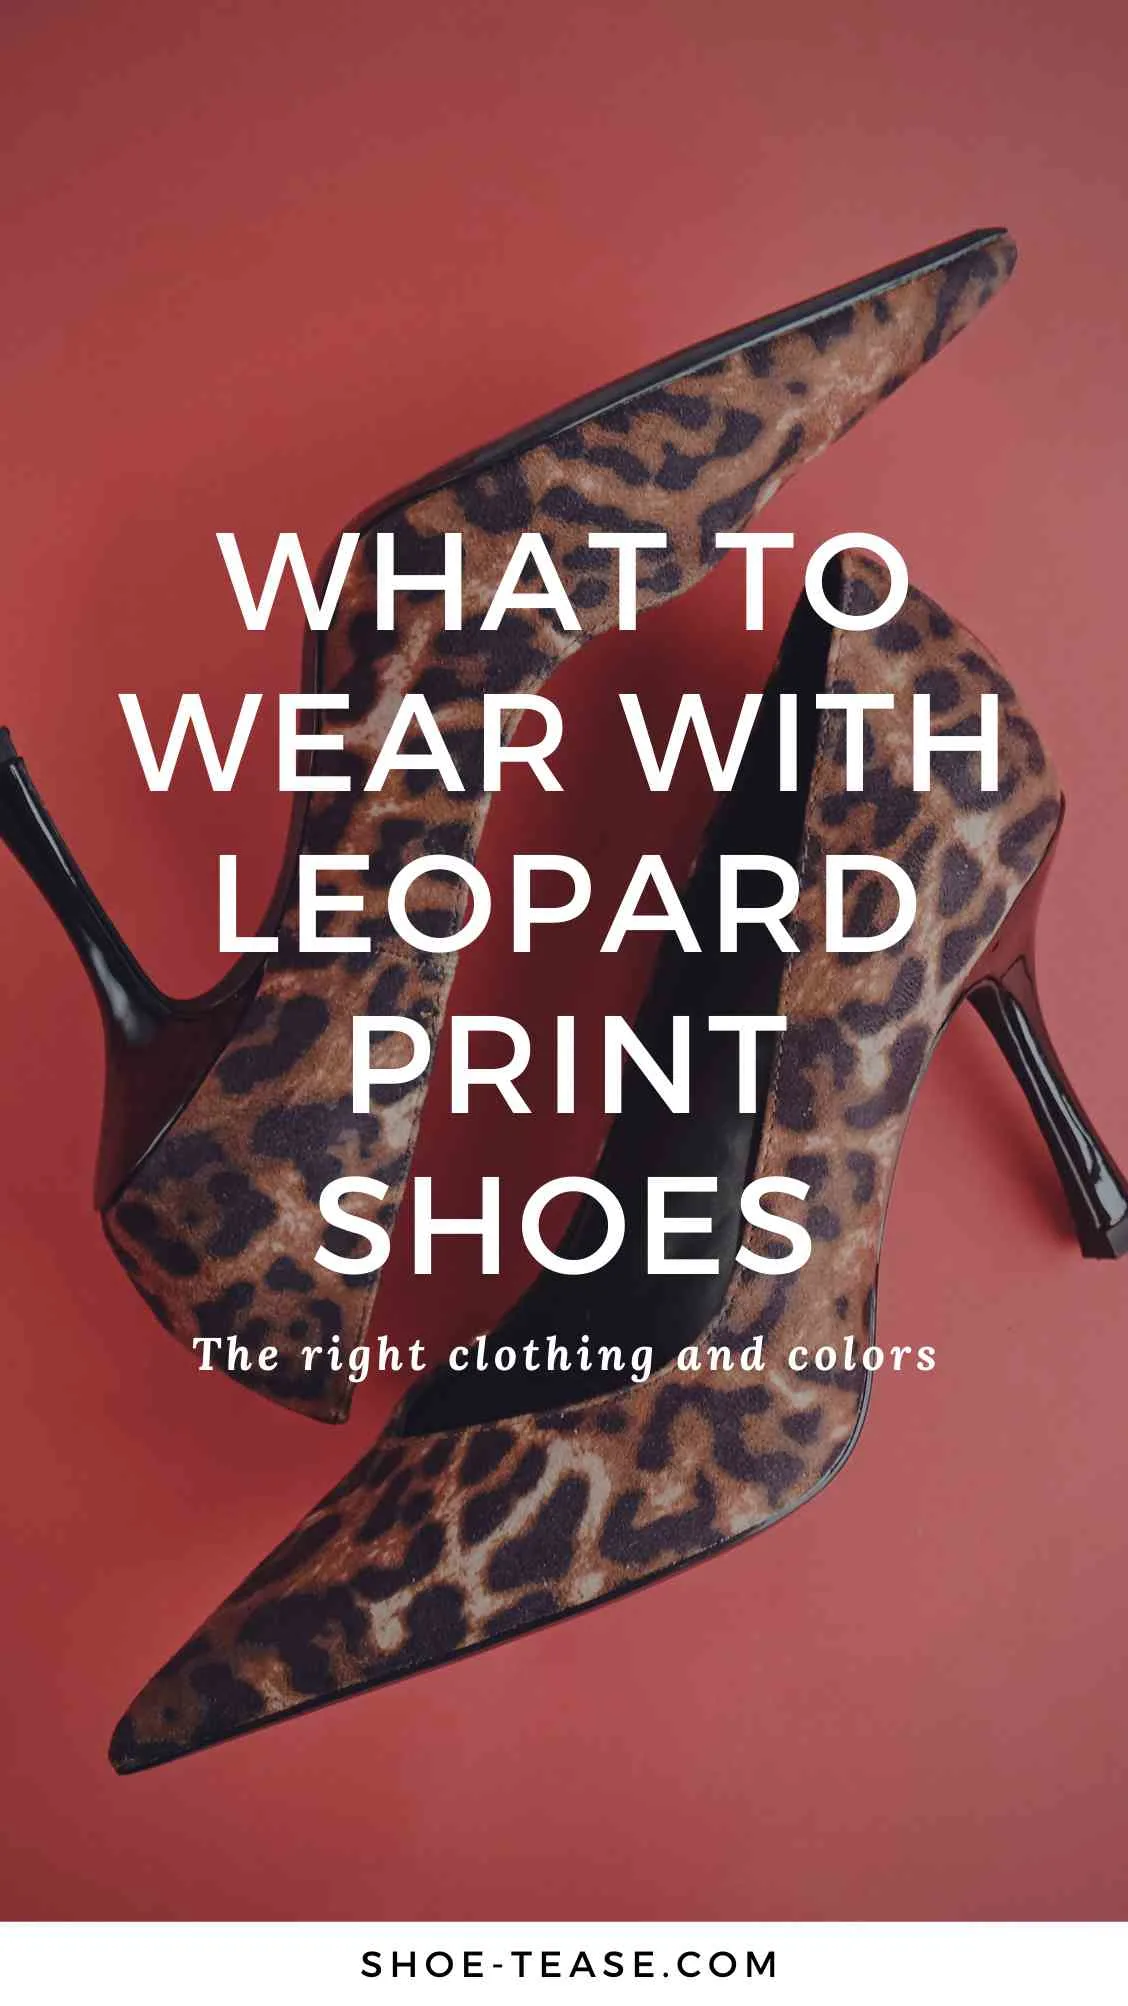 Caption "What to wear with leopard print shoes" in white lettering over image of leopard print heels on red background.